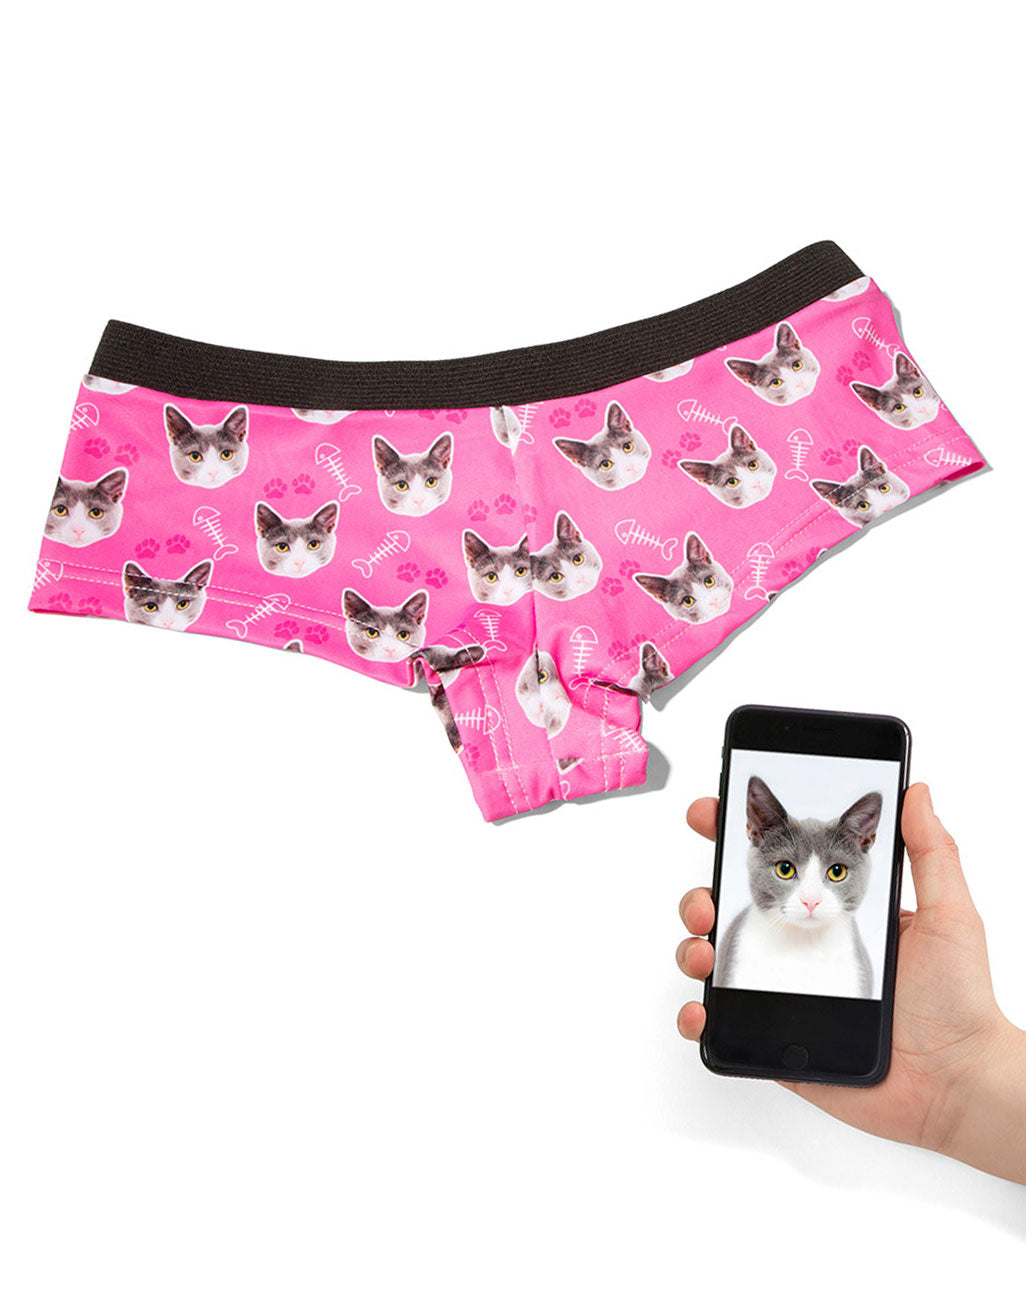 Your Cat On Knickers